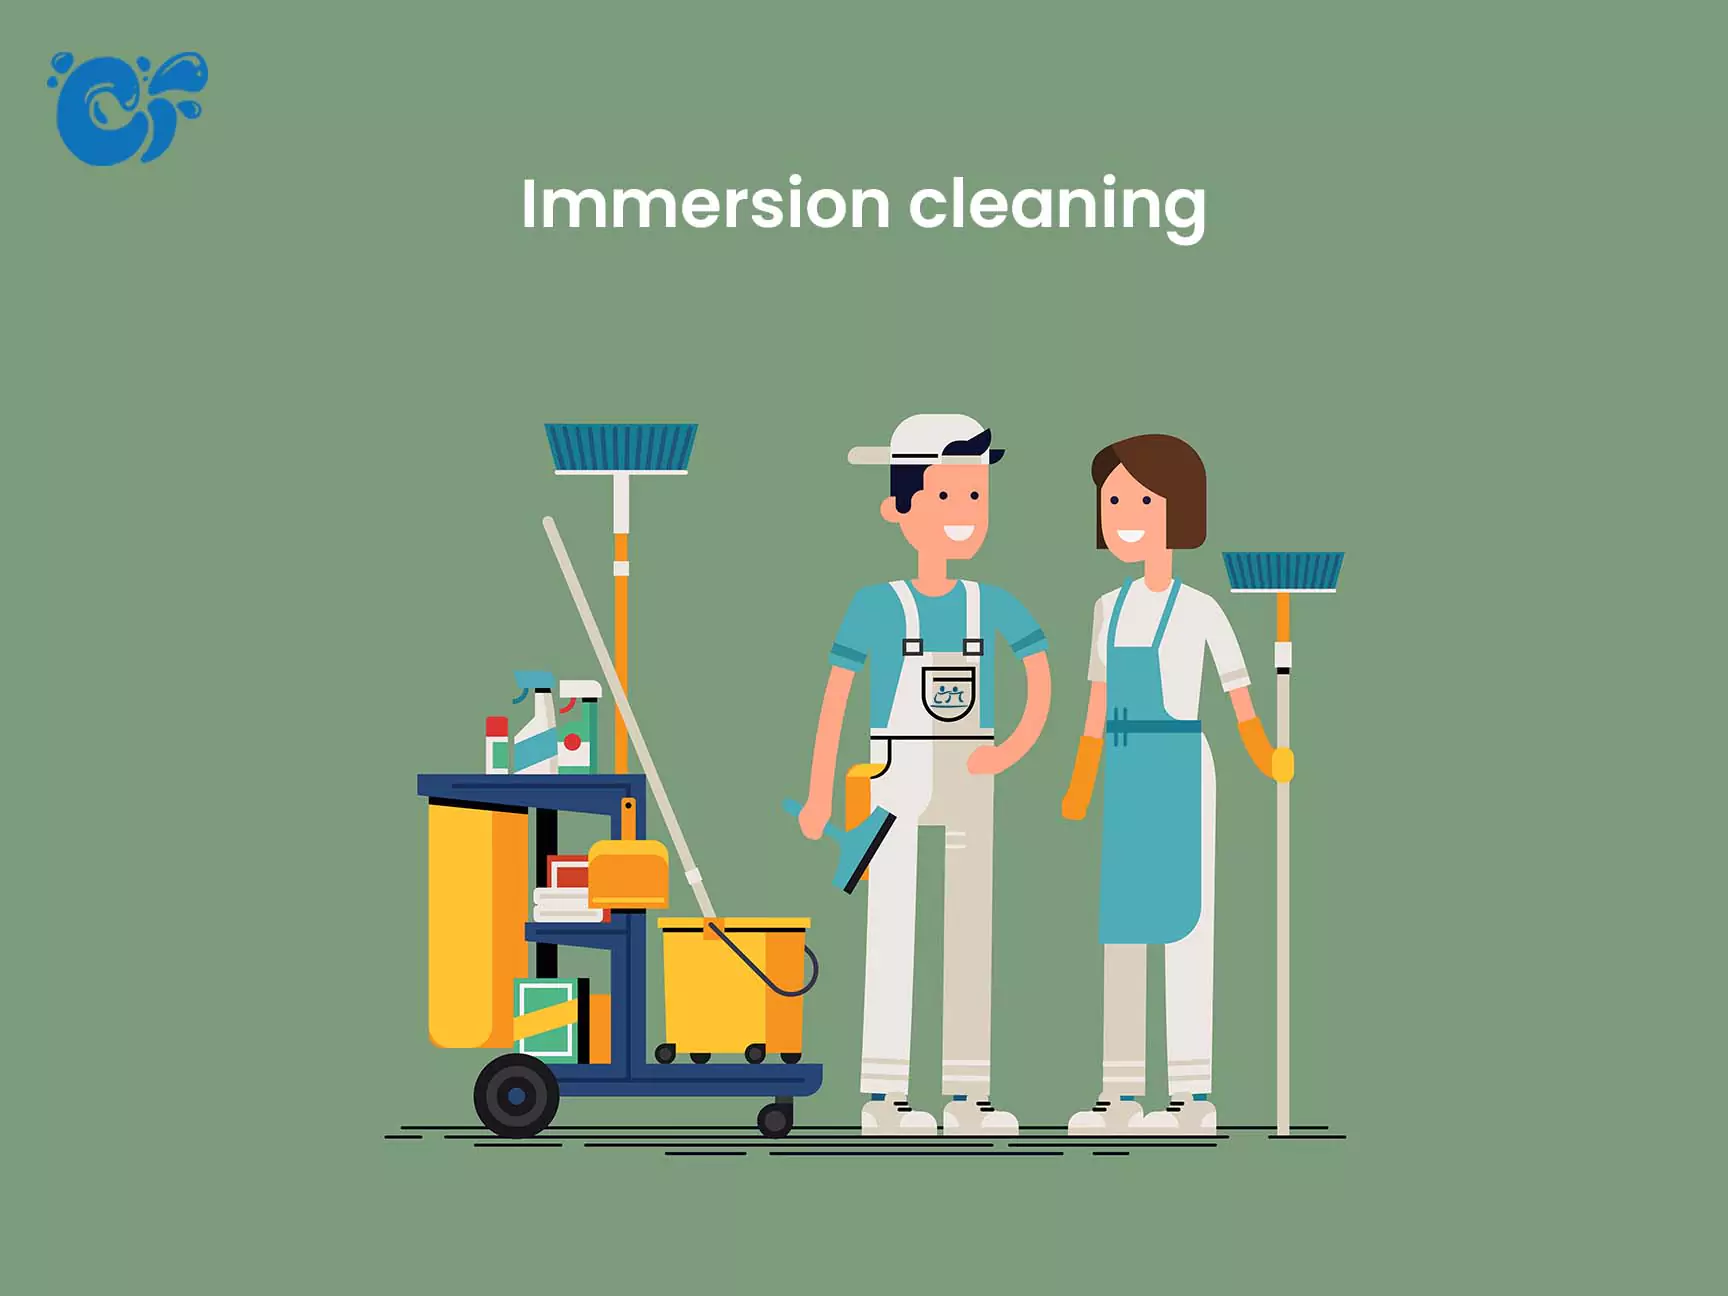 Immersion cleaning